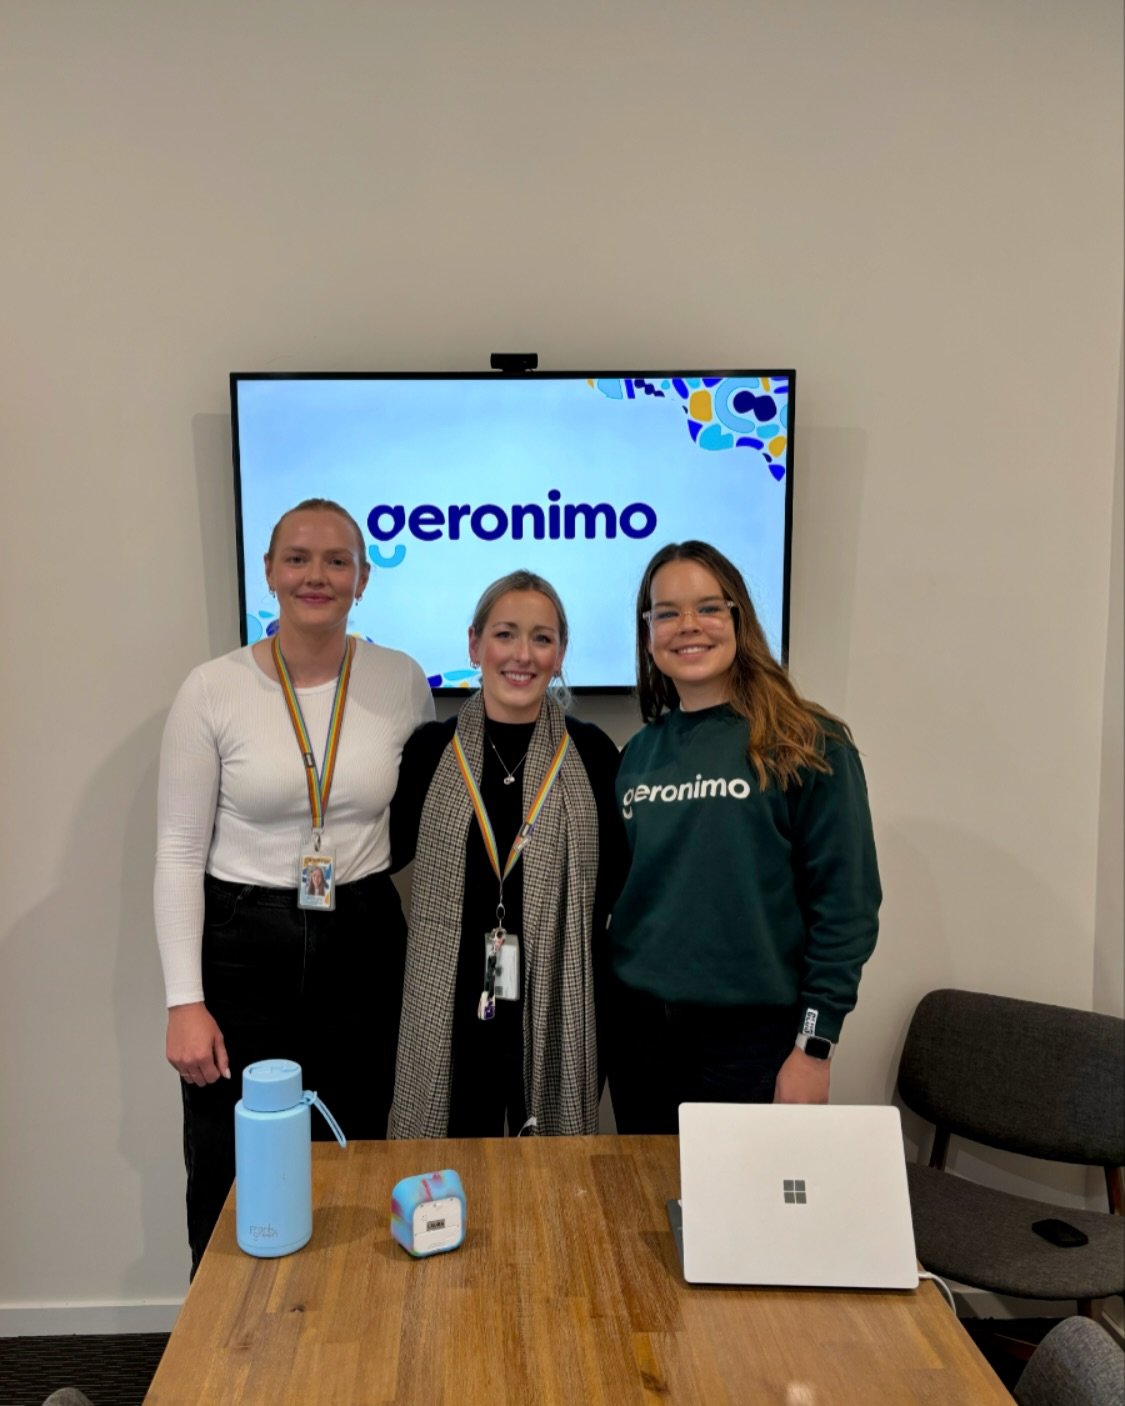 Our management team spent the morning presenting to a group of first year OT students from @deakinuniversity! We loved sharing about our experiences in community OT and supporting participants to increase their independent living skills 👏👩&zwj;🍳🏡